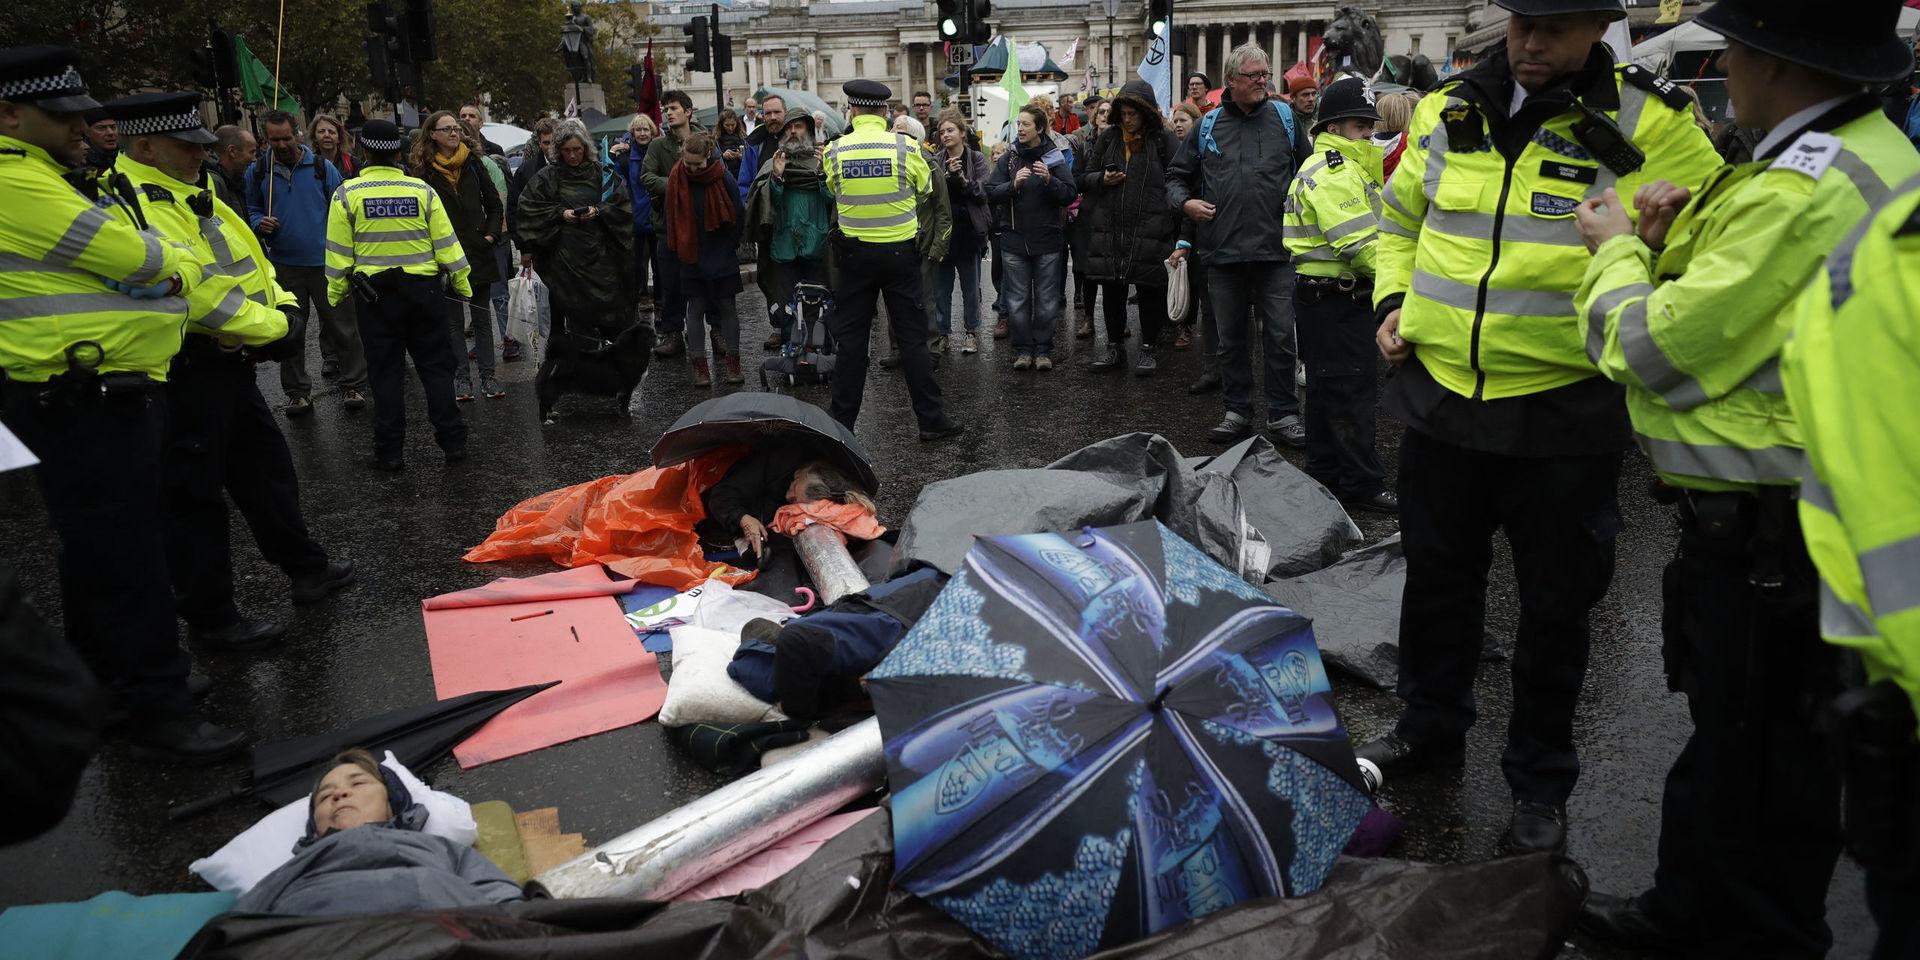 Extinction Rebellion climate change protesters lie with their arms locked together blocking a road at the bottom of Trafalgar Square in London, Friday, Oct. 11, 2019. Some hundreds of climate change activists are in London during a fifth day of protests by the Extinction Rebellion movement to demand more urgent actions to counter global warming. (AP Photo/Matt Dunham)  LMD113